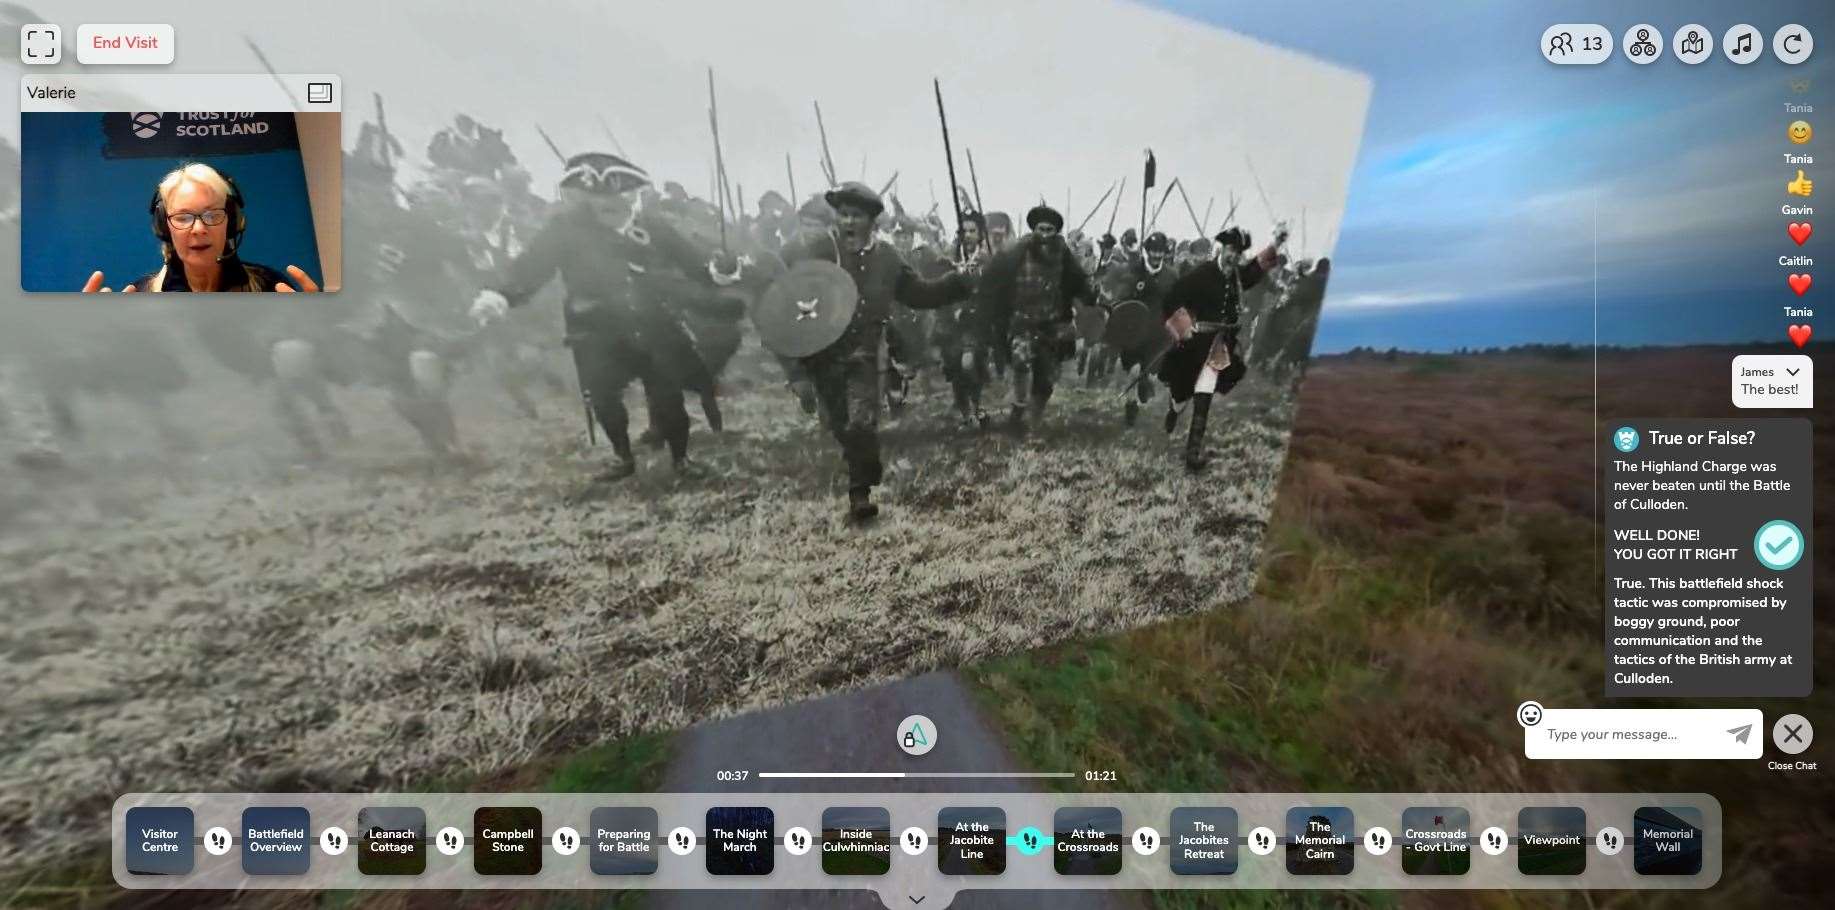 Guided tours of Culloden Battlefield will be available online.